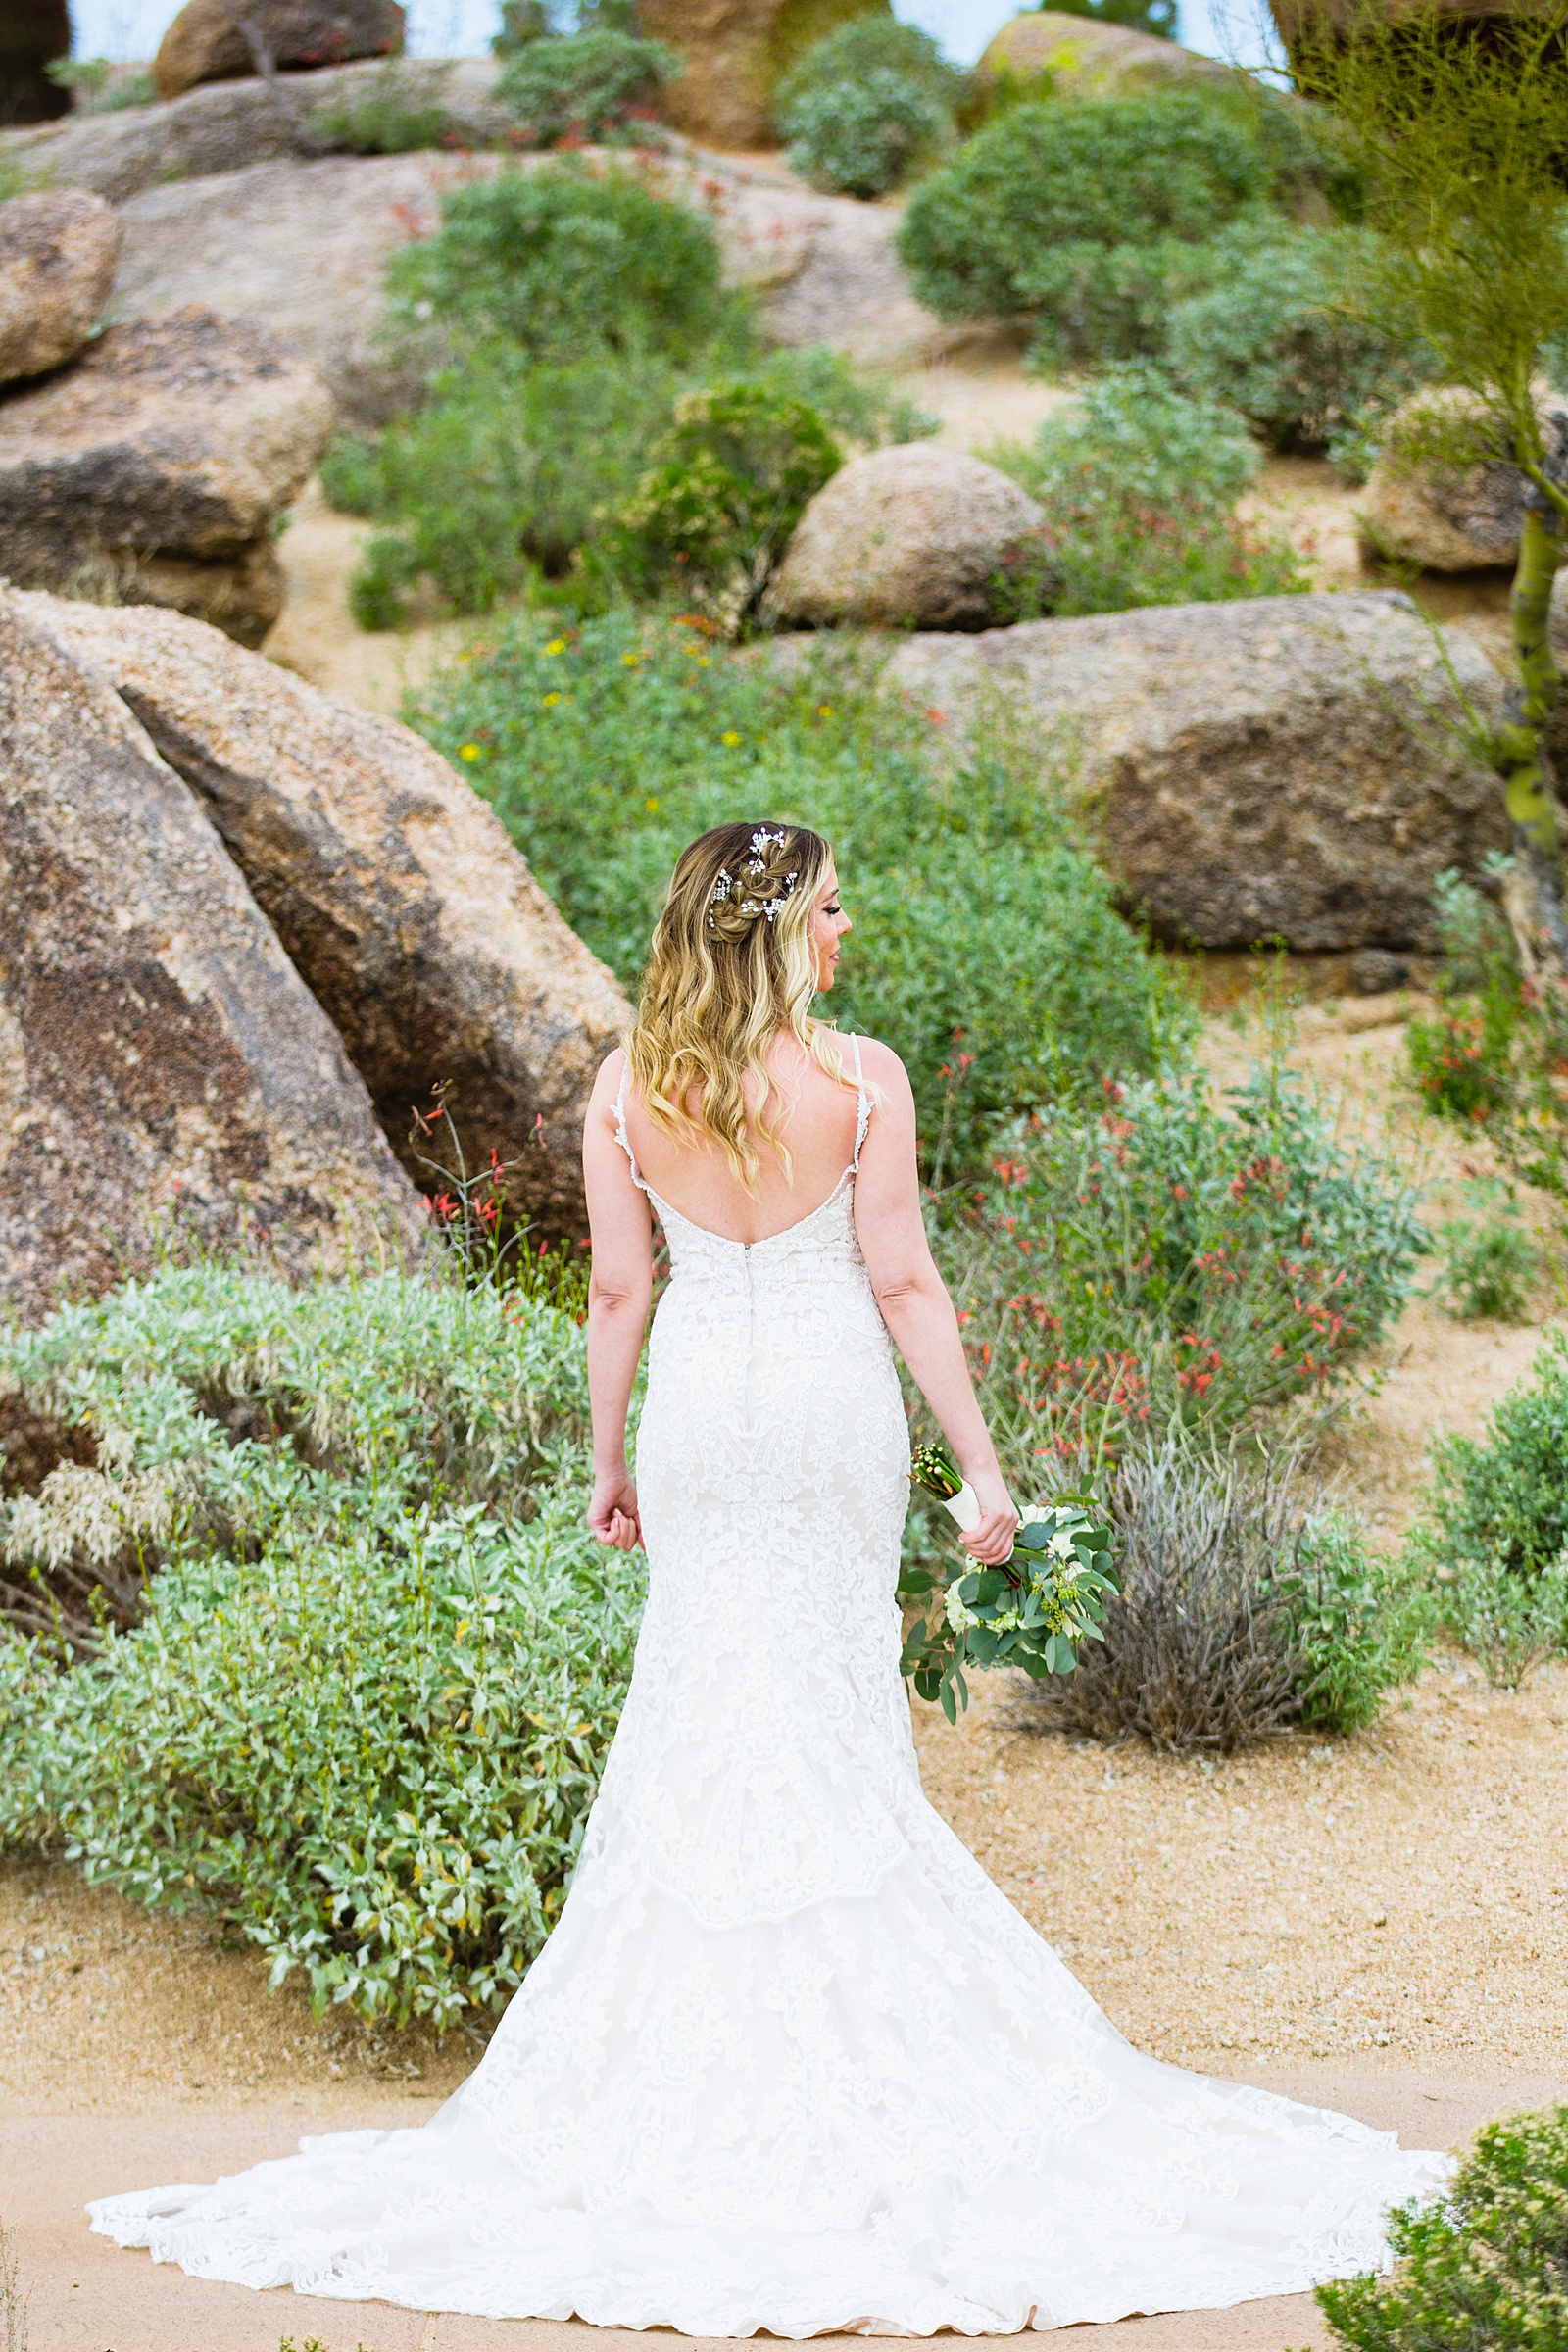 Brides romantic, lace wedding dress at her desert wedding at Troon North by Scottsdale wedding photographer PMA Photography.